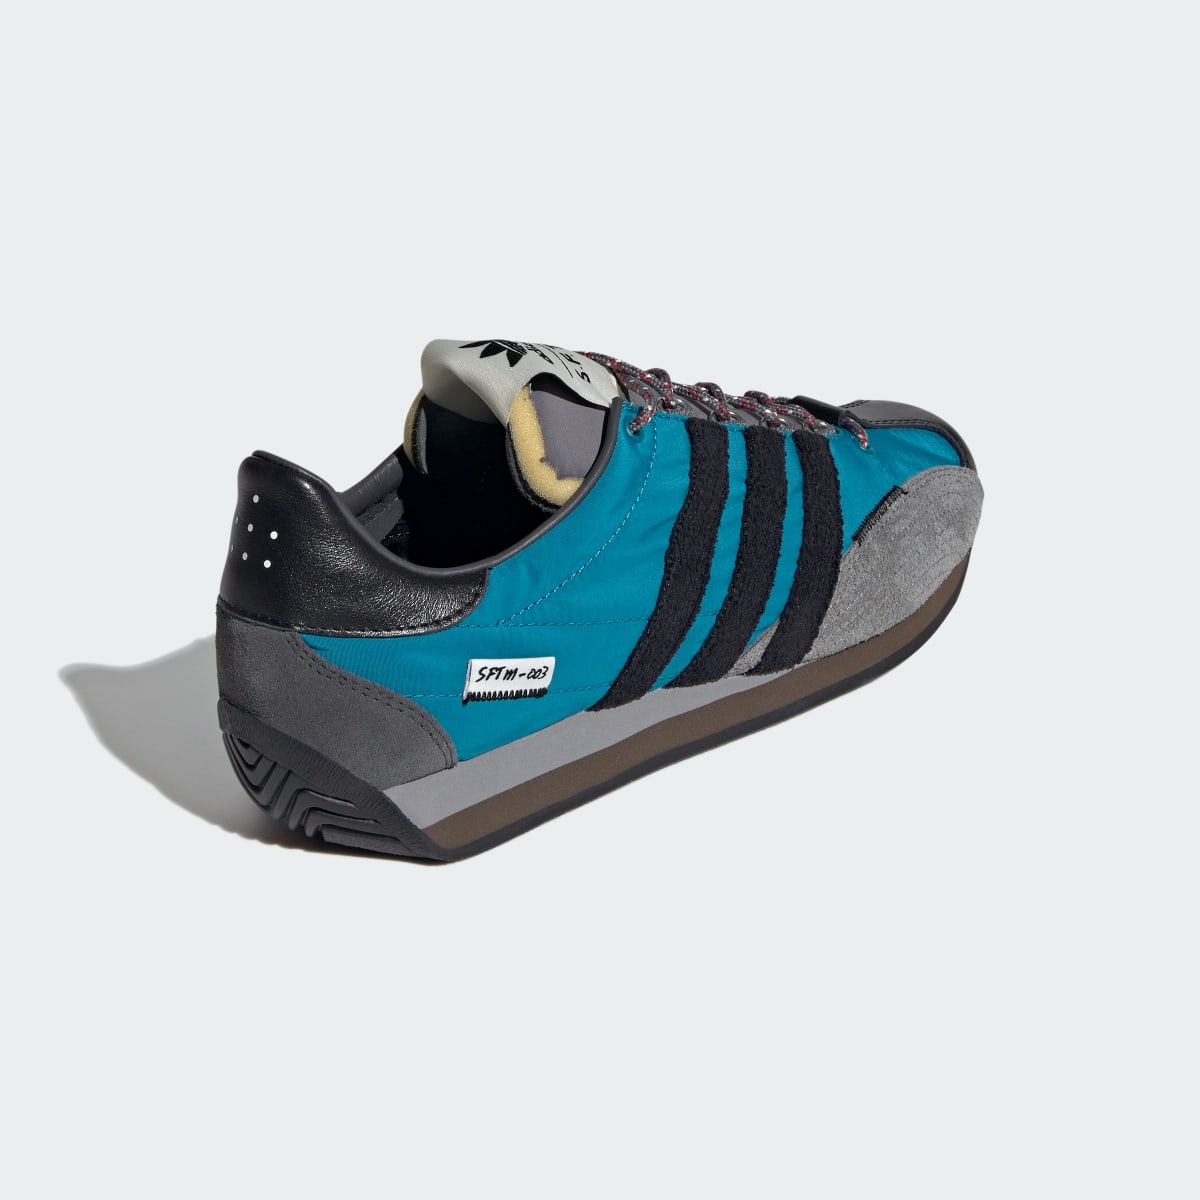 Adidas SFTM Country OG Low Trainers. 7